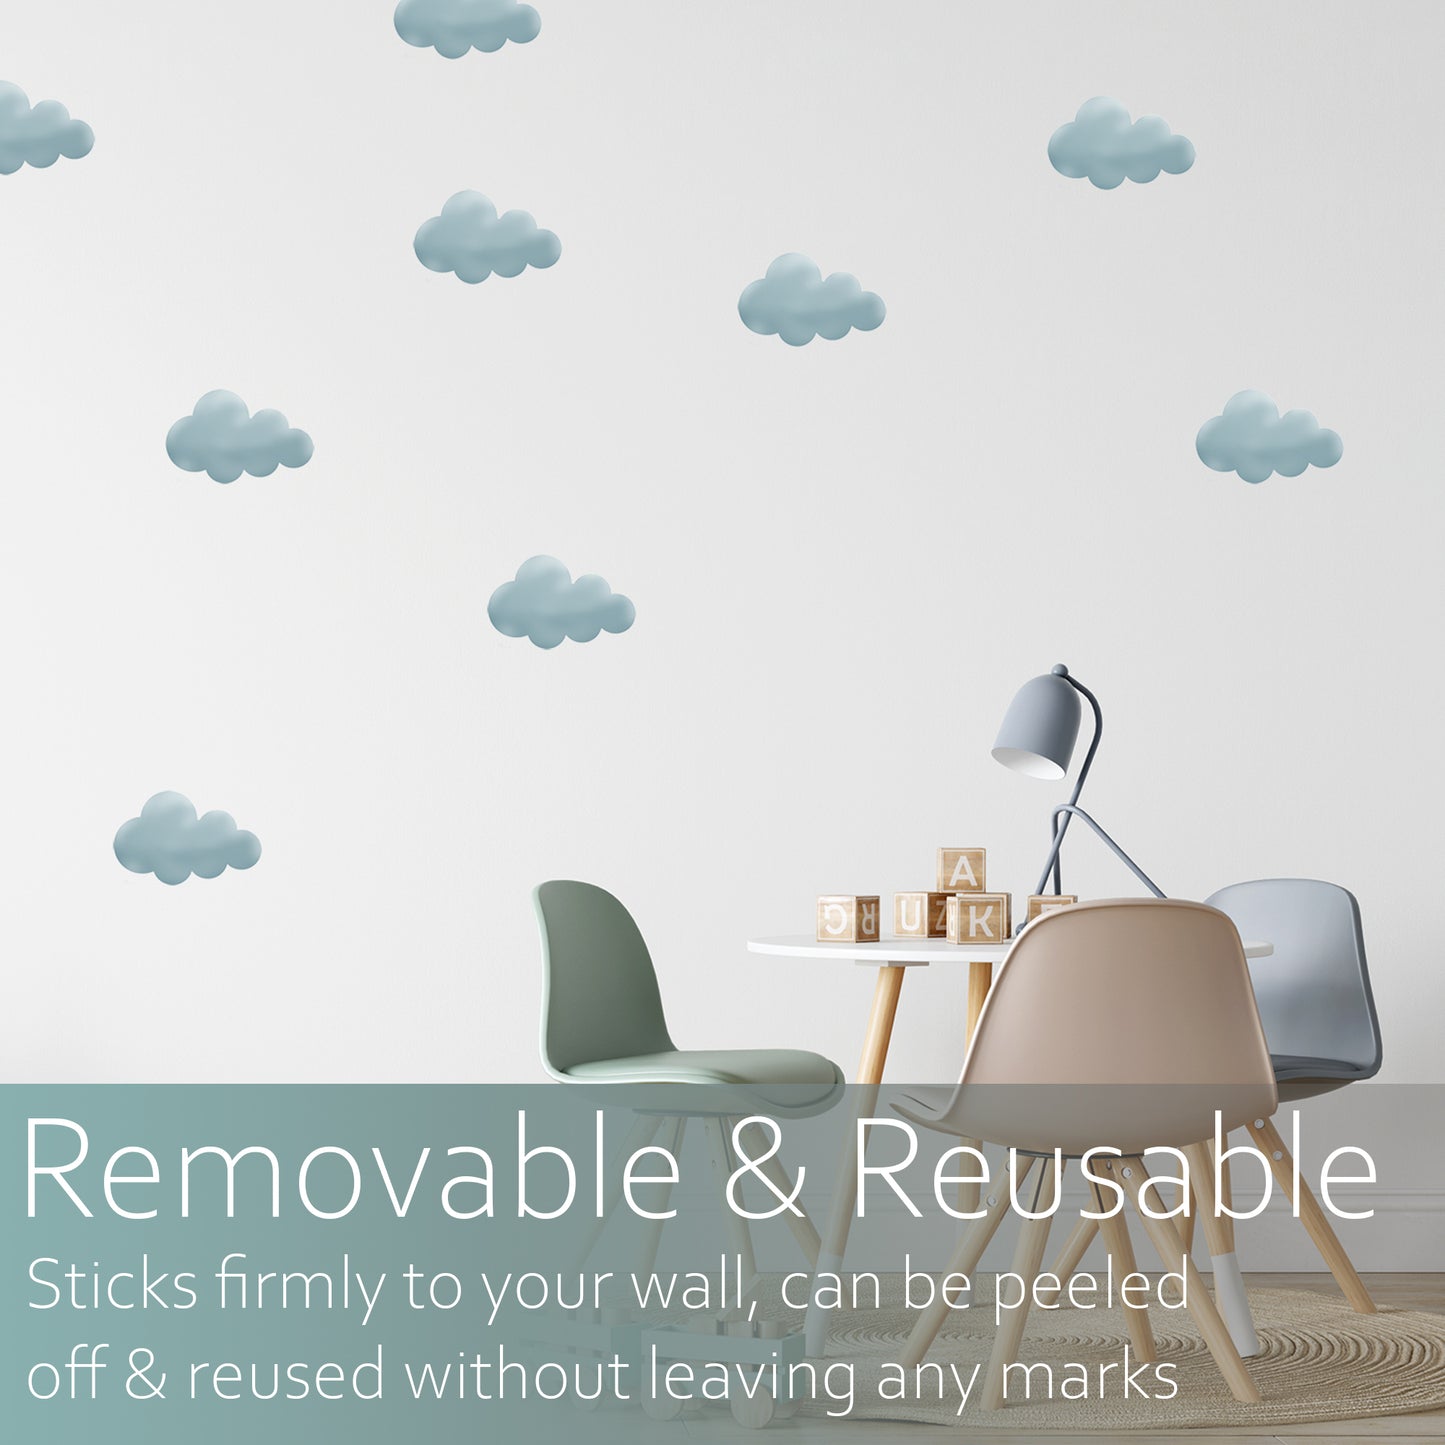 Blue clouds | Fabric wall stickers